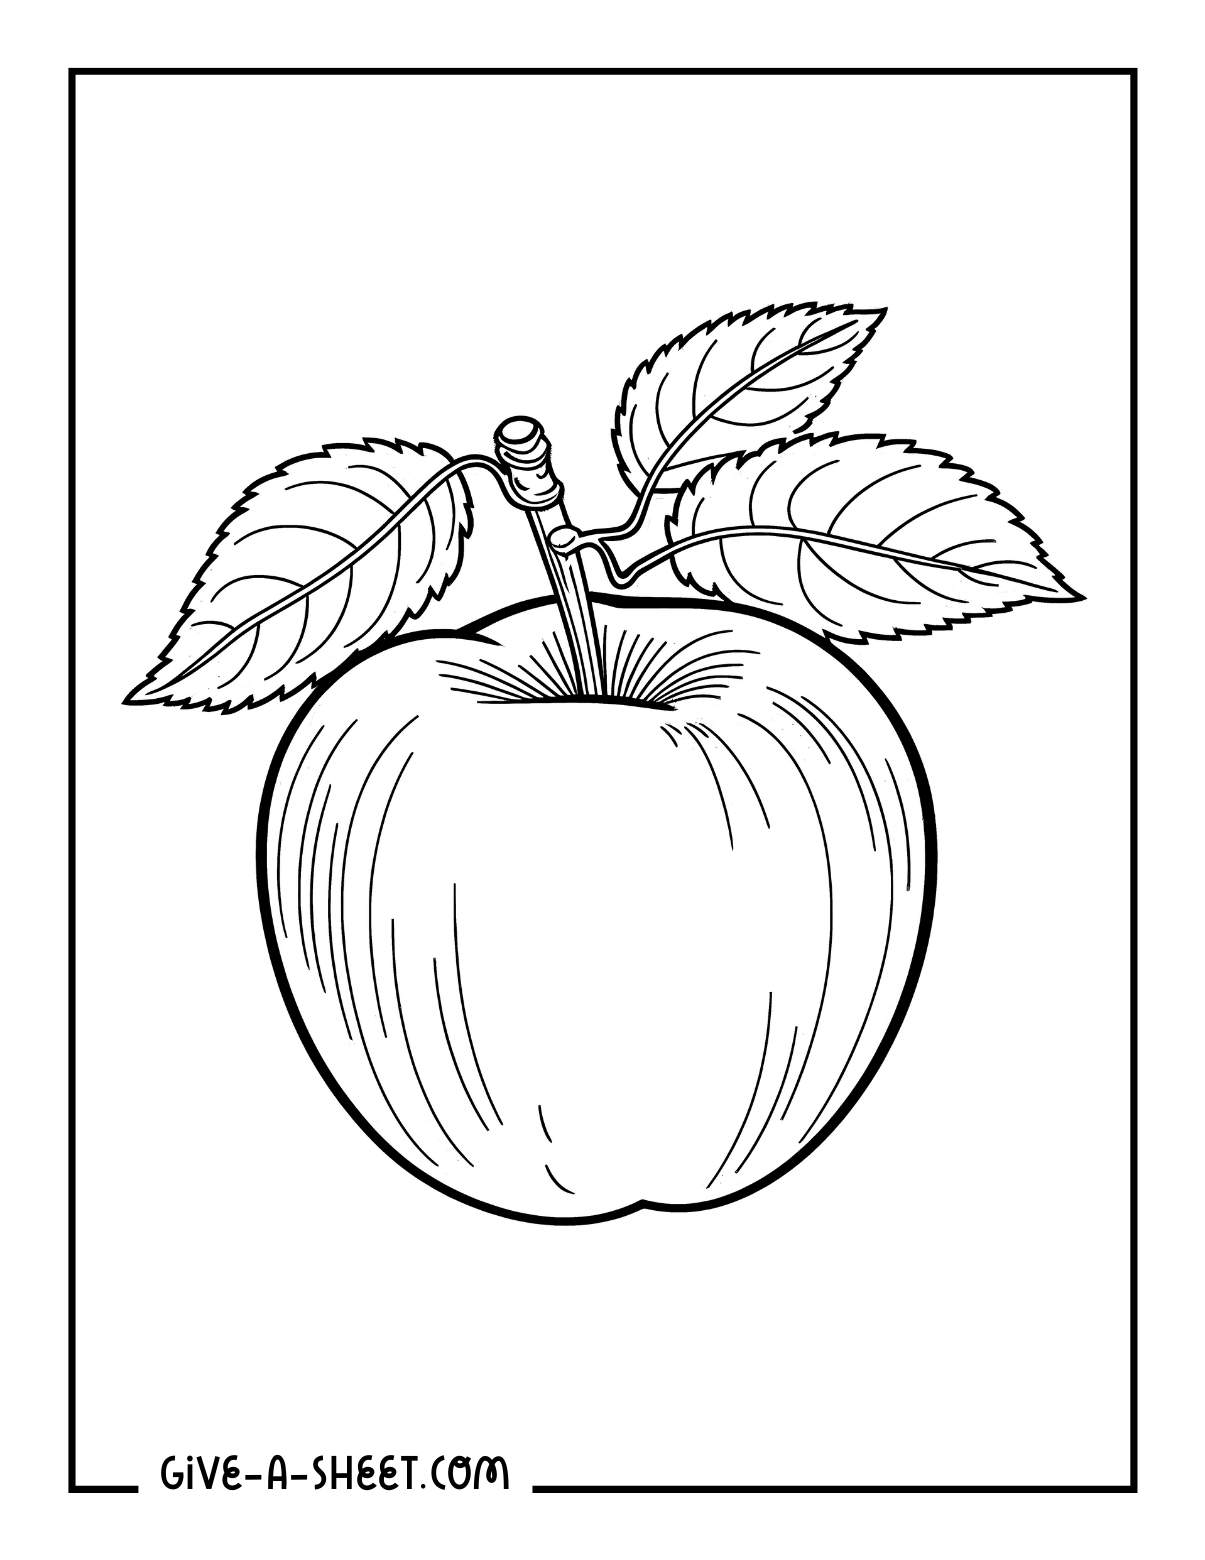 Easy apple coloring page for kids.